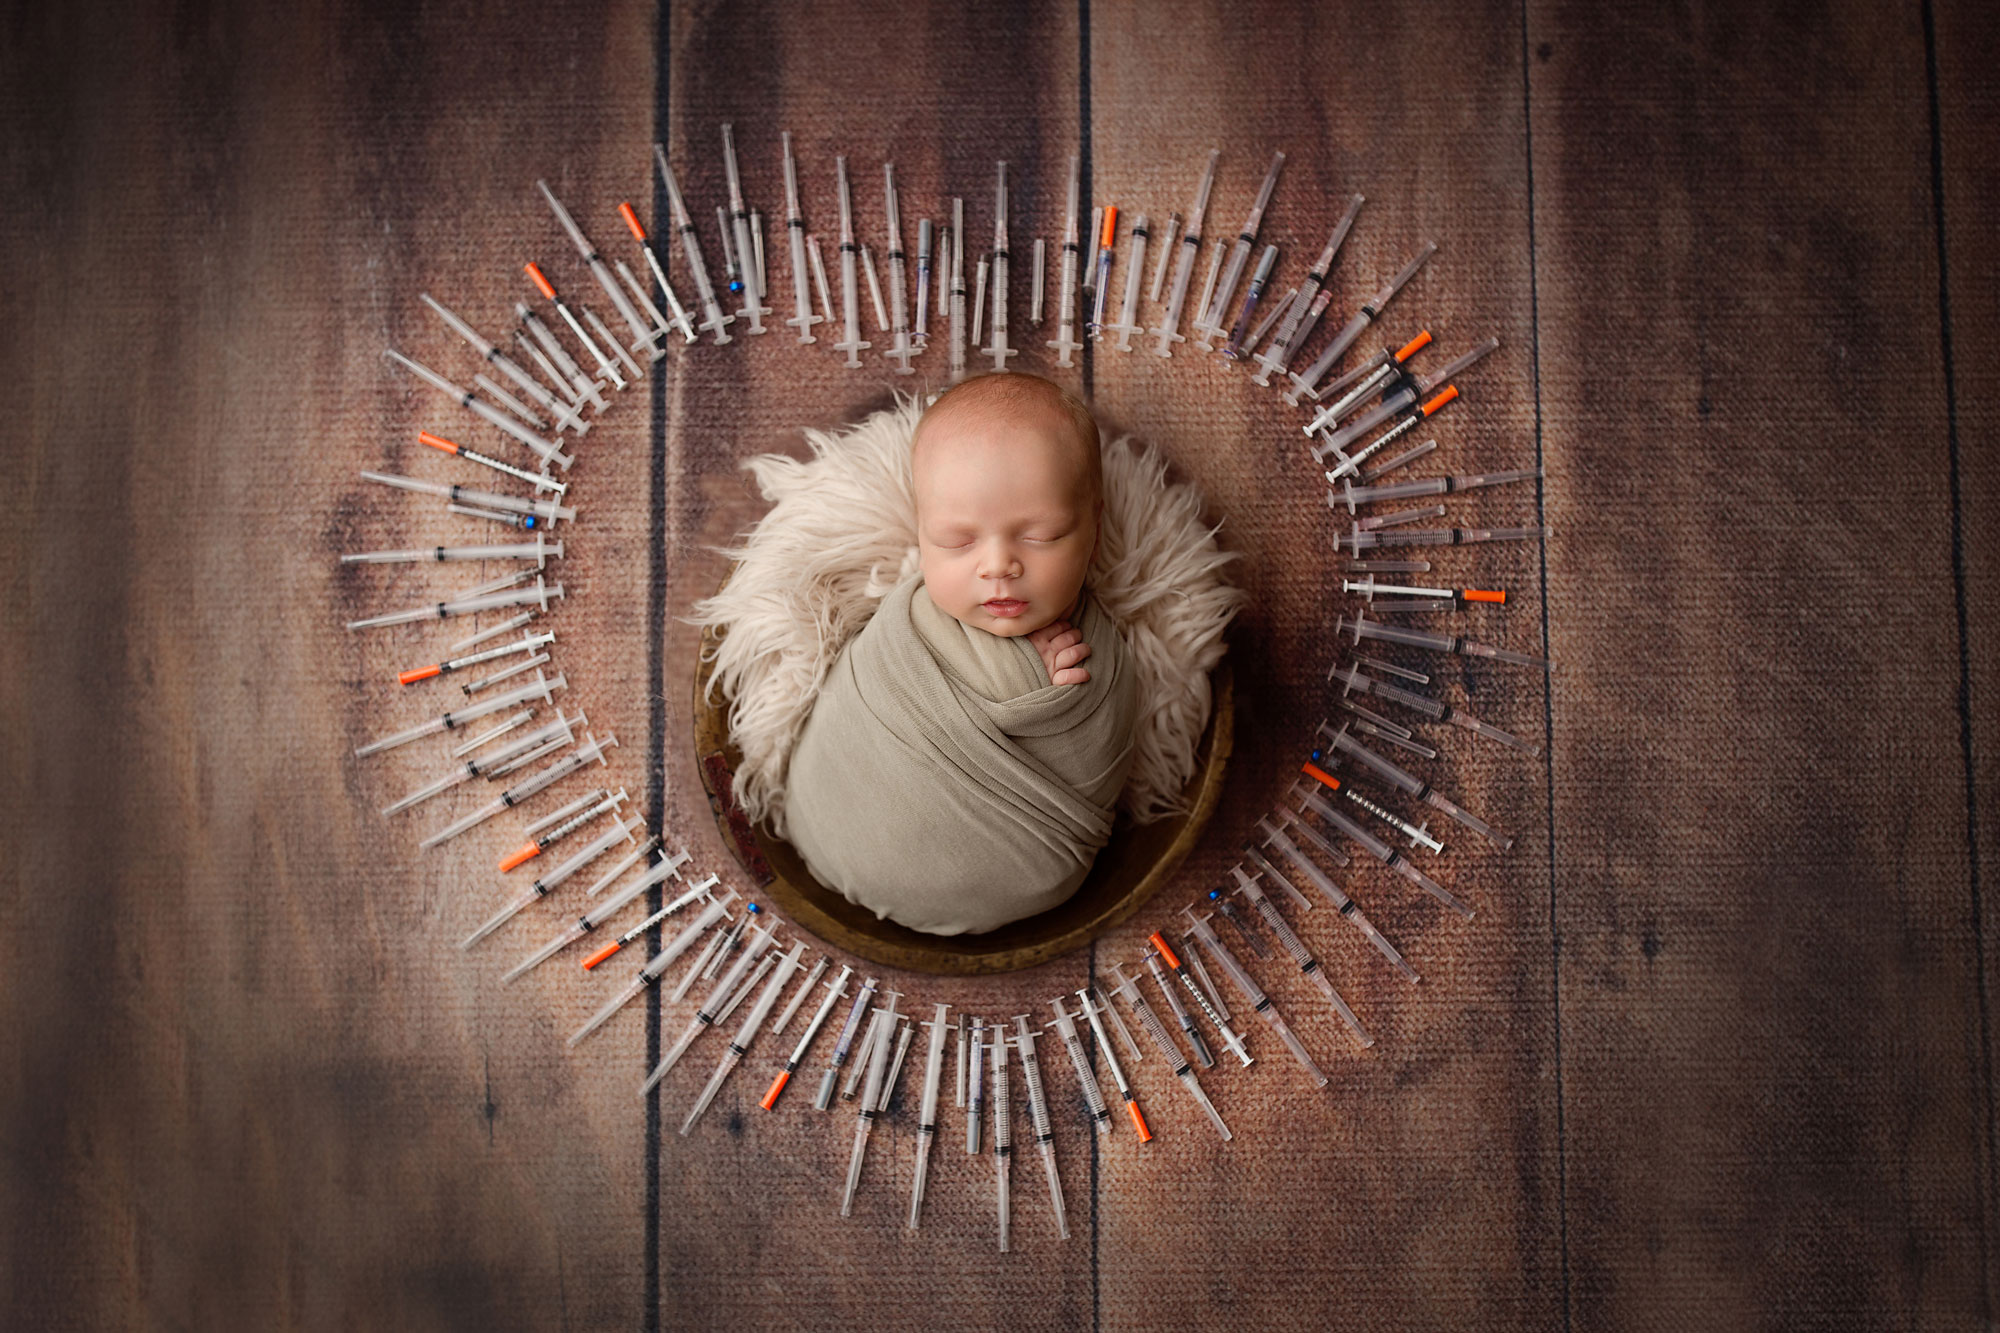 ivf baby pictures new jersey, baby sleeping in middle of heart made of ivf needles